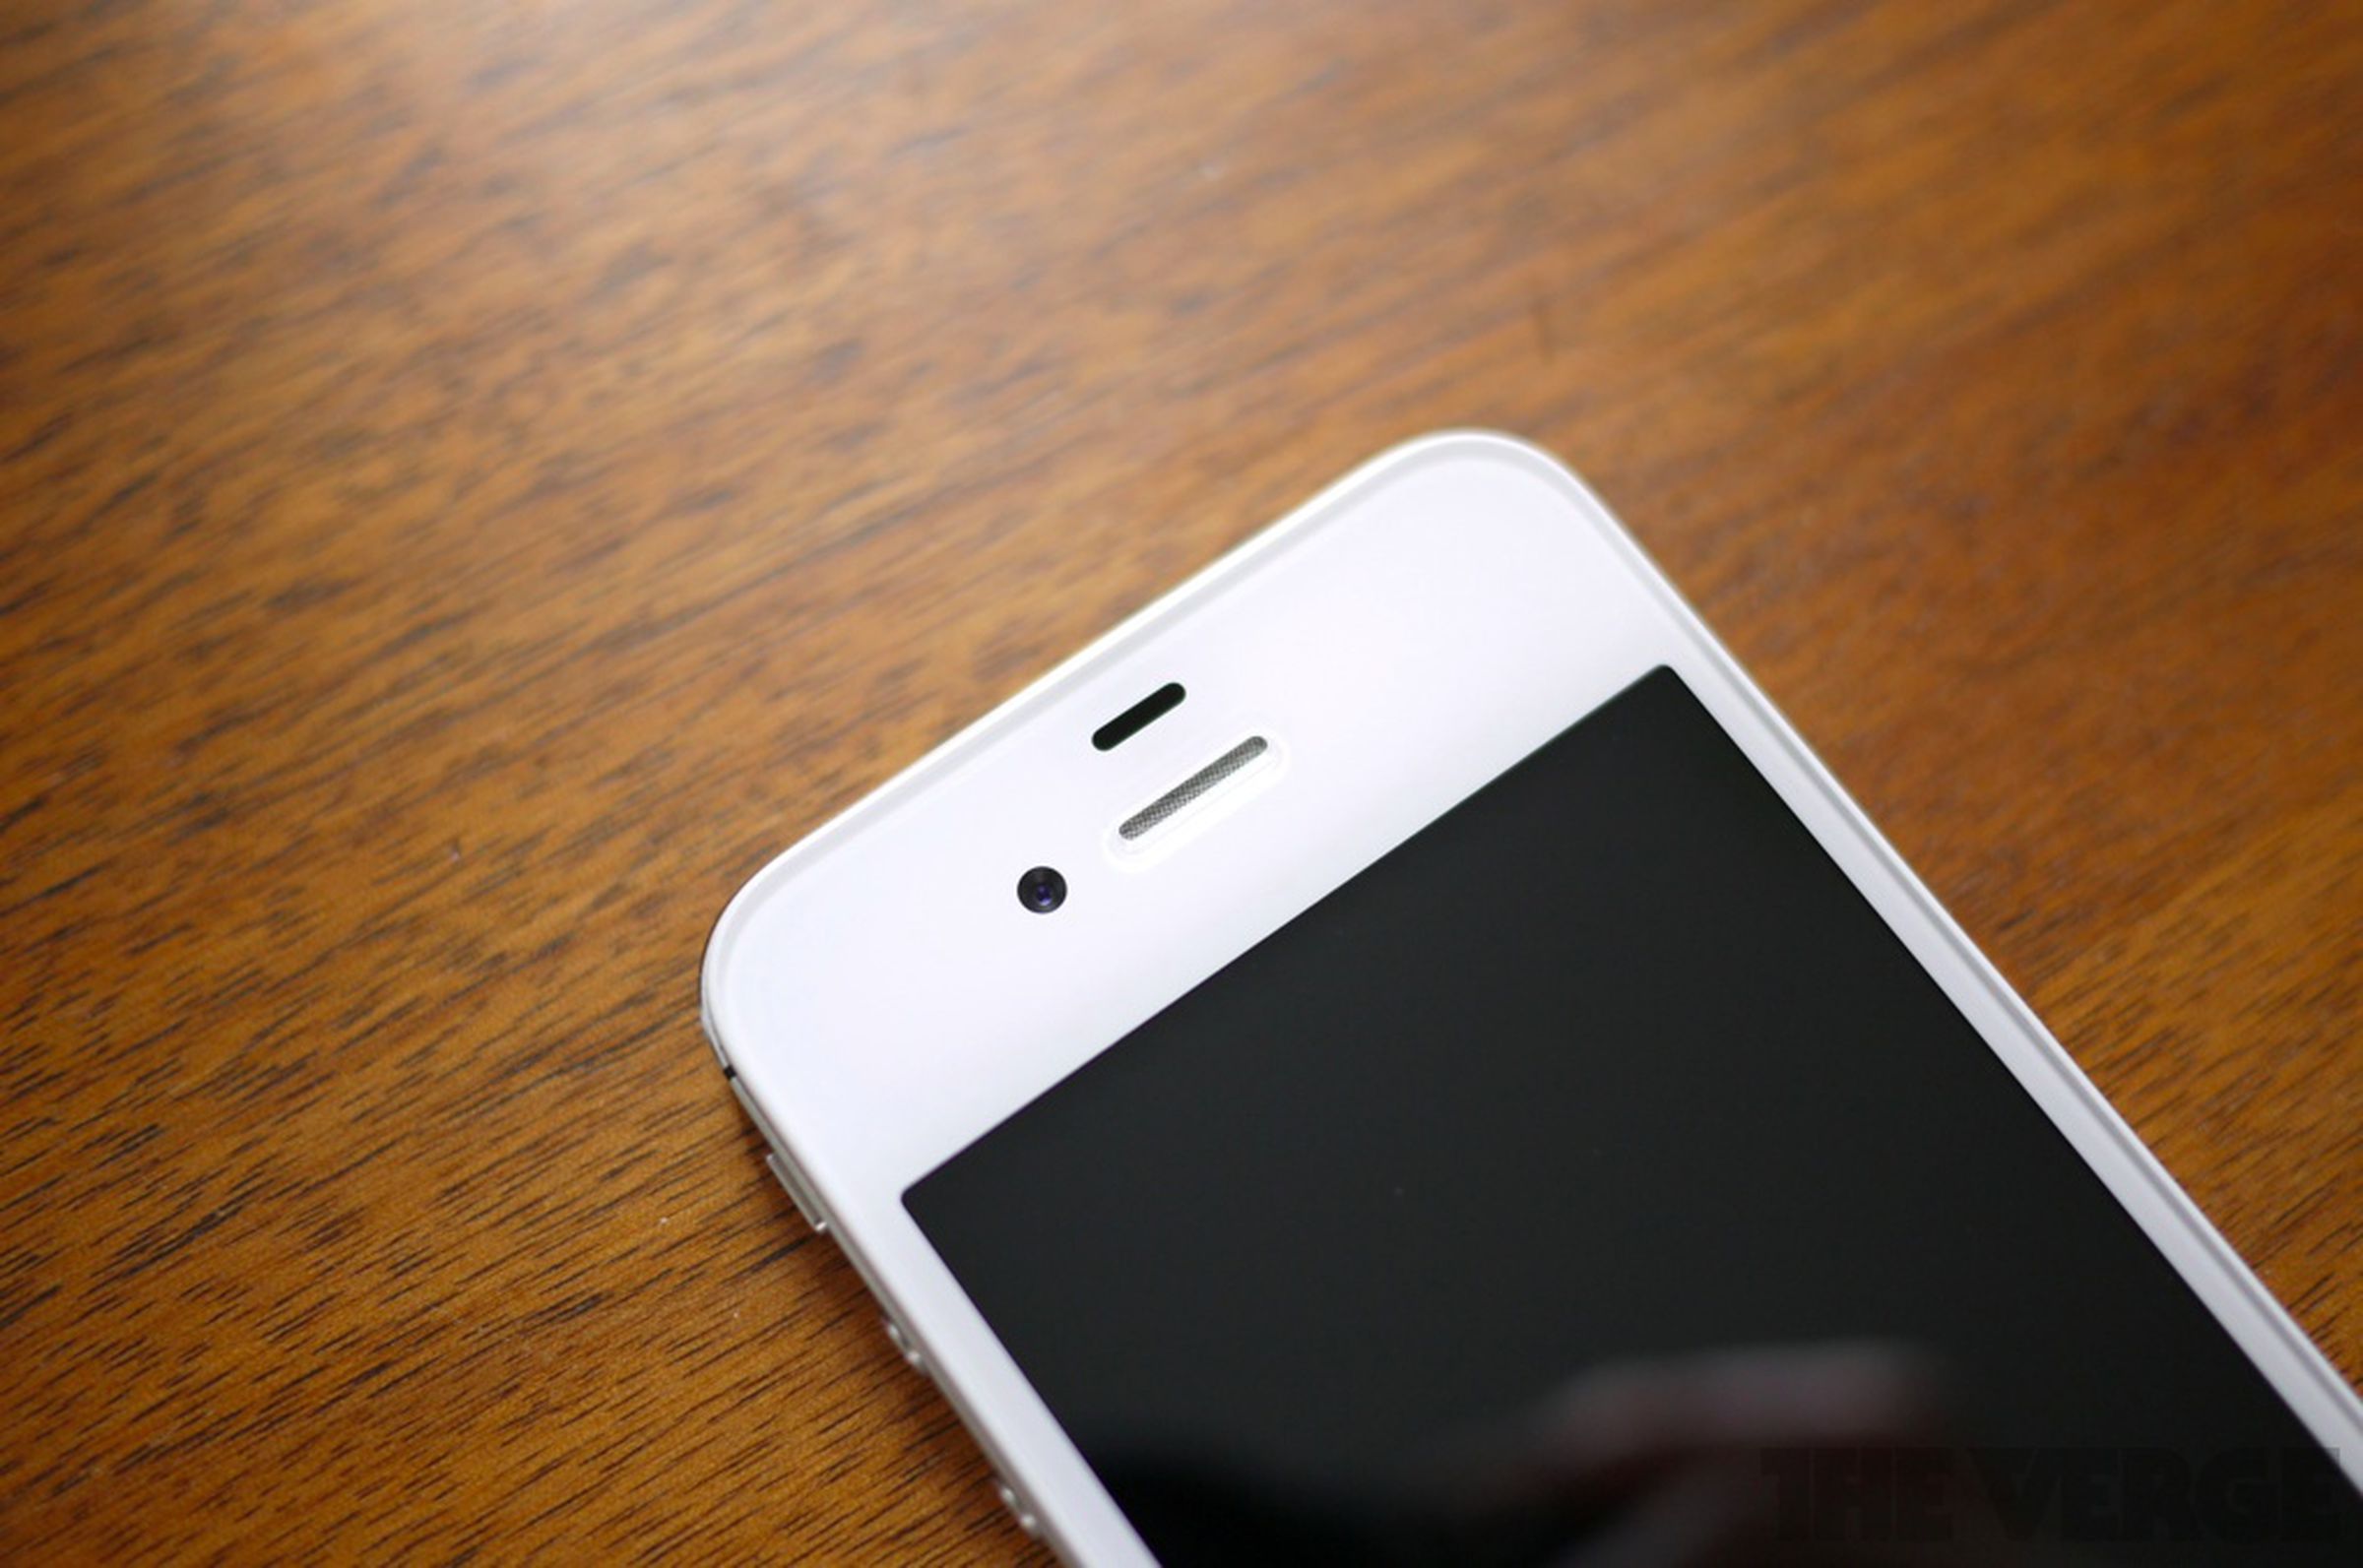 iPhone 4S hands-on